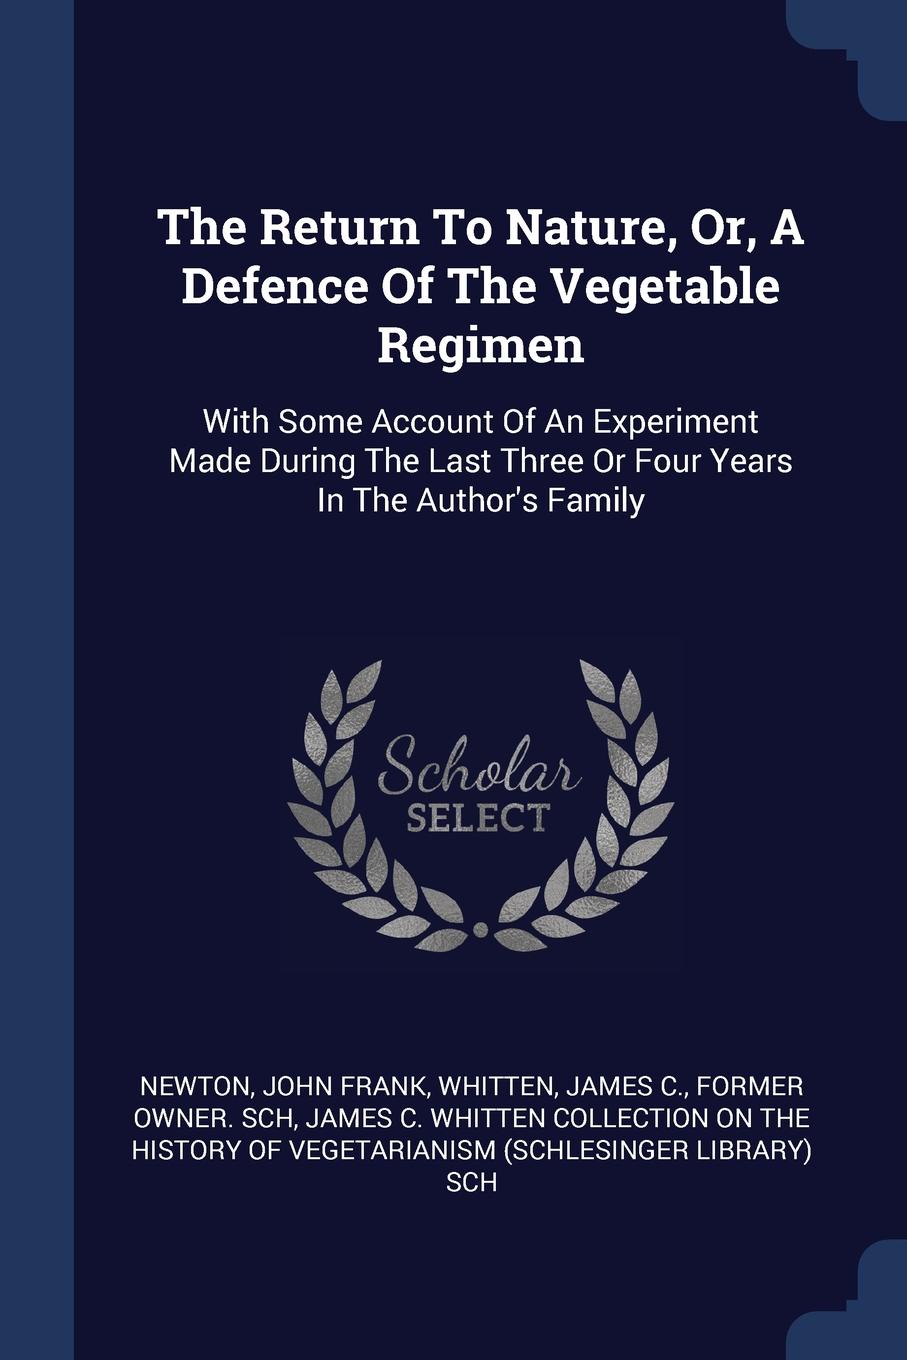 The Return To Nature, Or, A Defence Of The Vegetable Regimen. With Some Account Of An Experiment Made During The Last Three Or Four Years In The Author.s Family